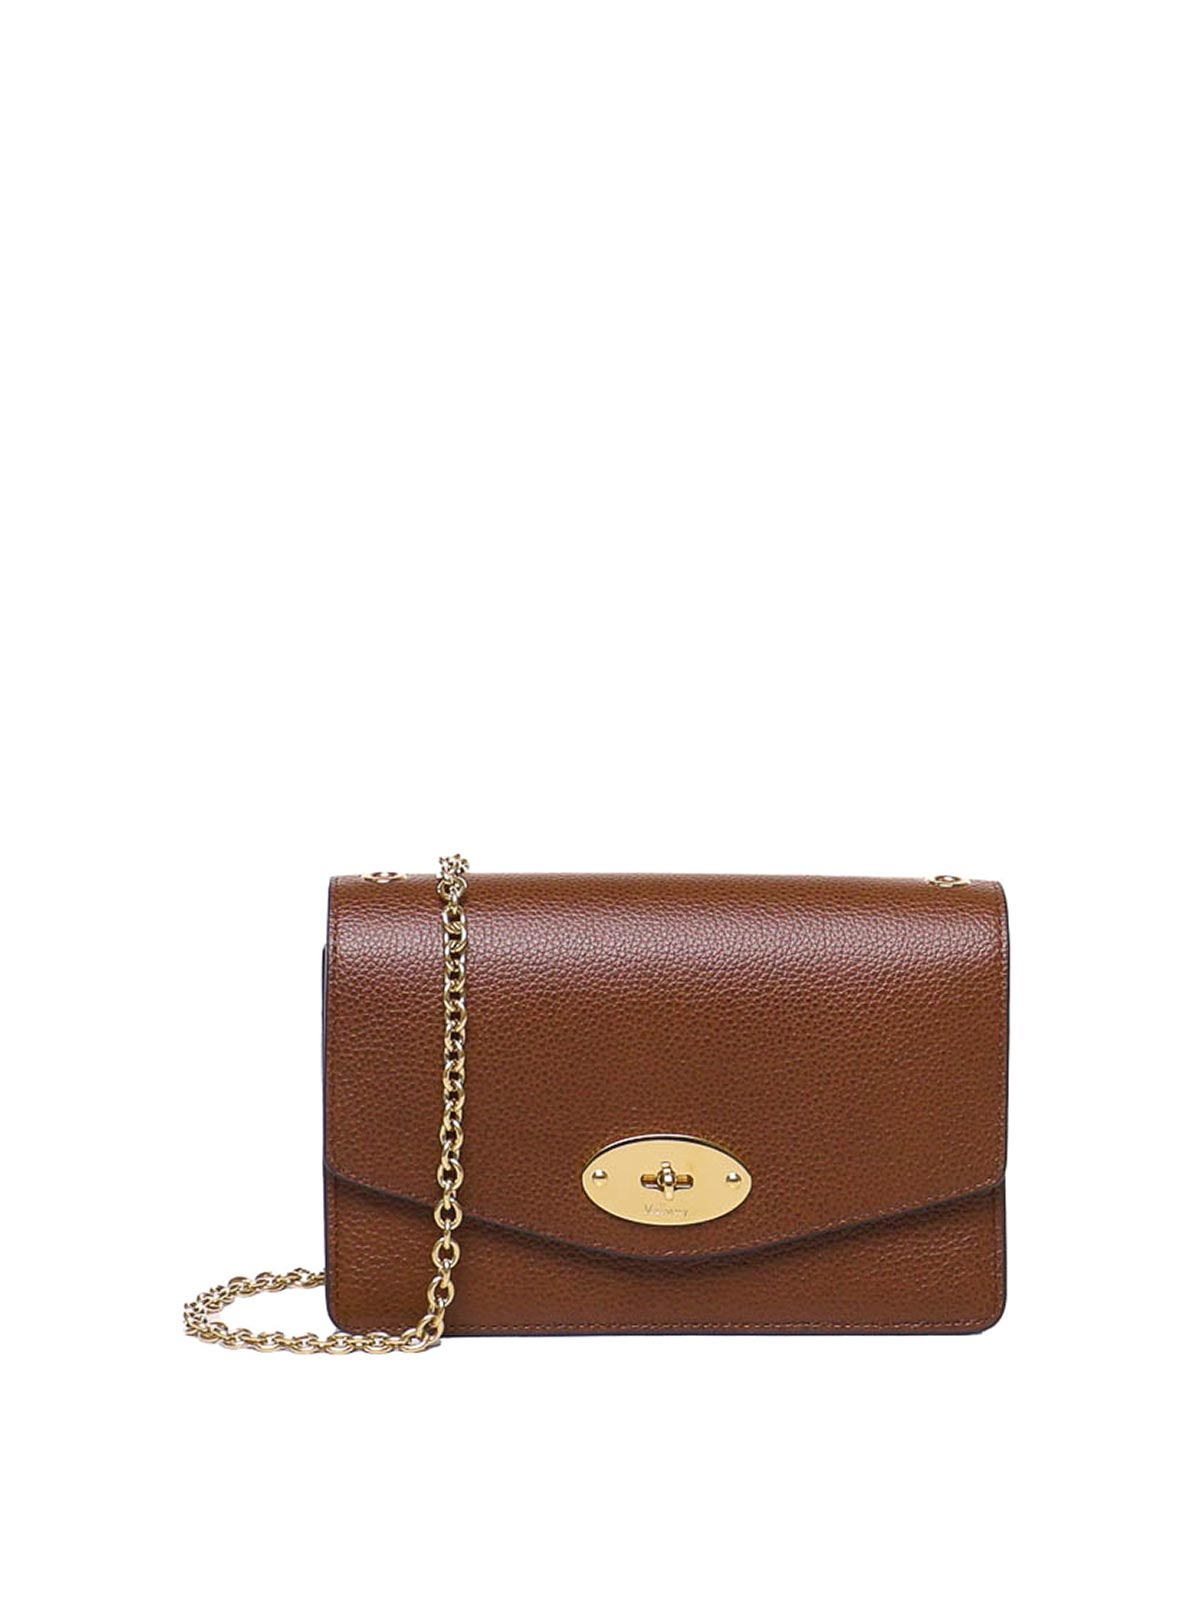 Mulberry Small Darley Daisy Crossbody Bag In Brown